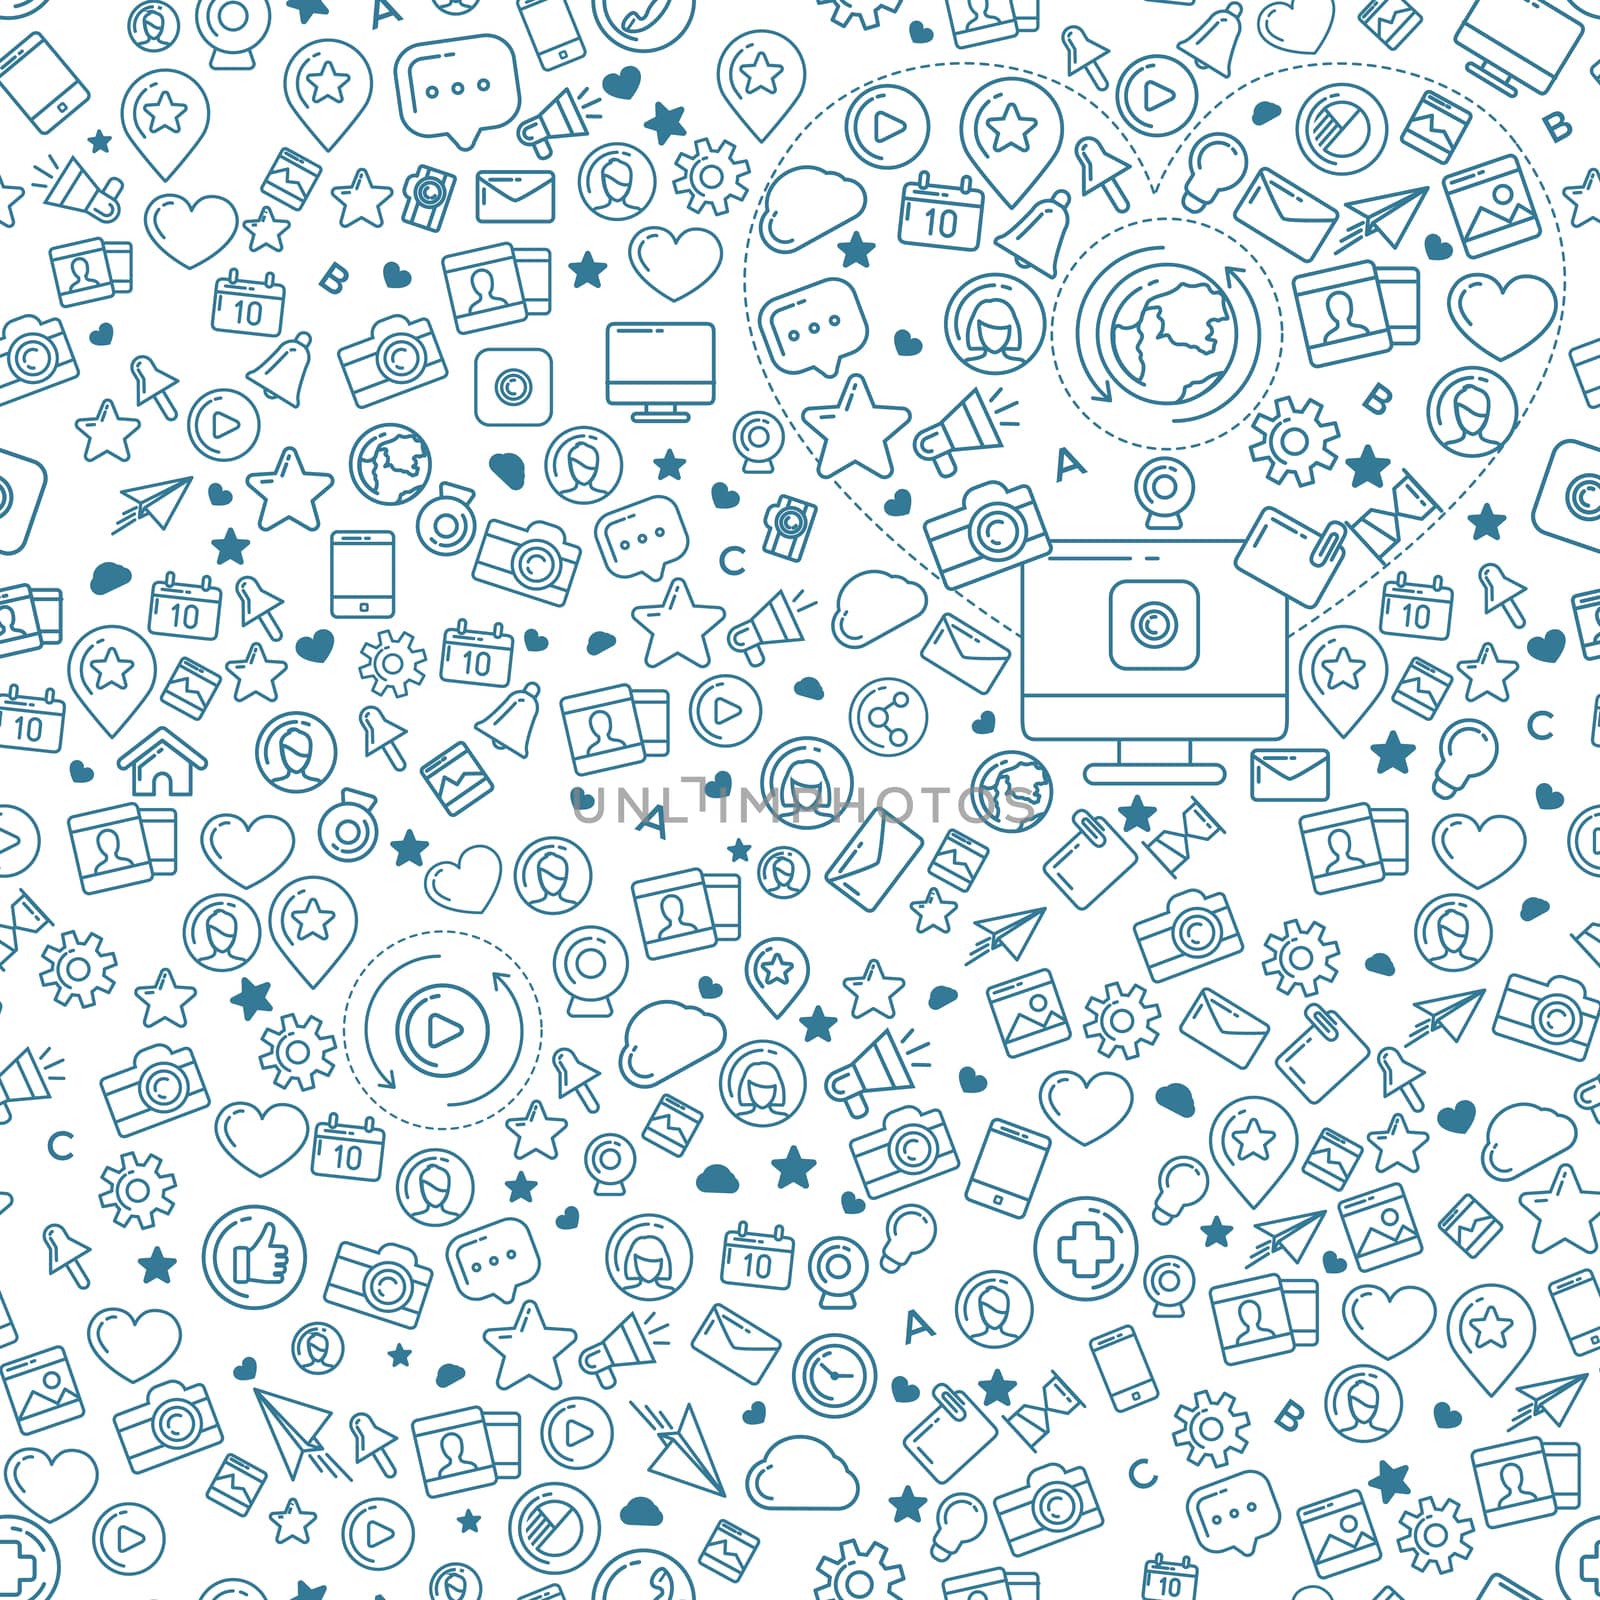 Social Media Blue Seamless Pattern by ConceptCafe